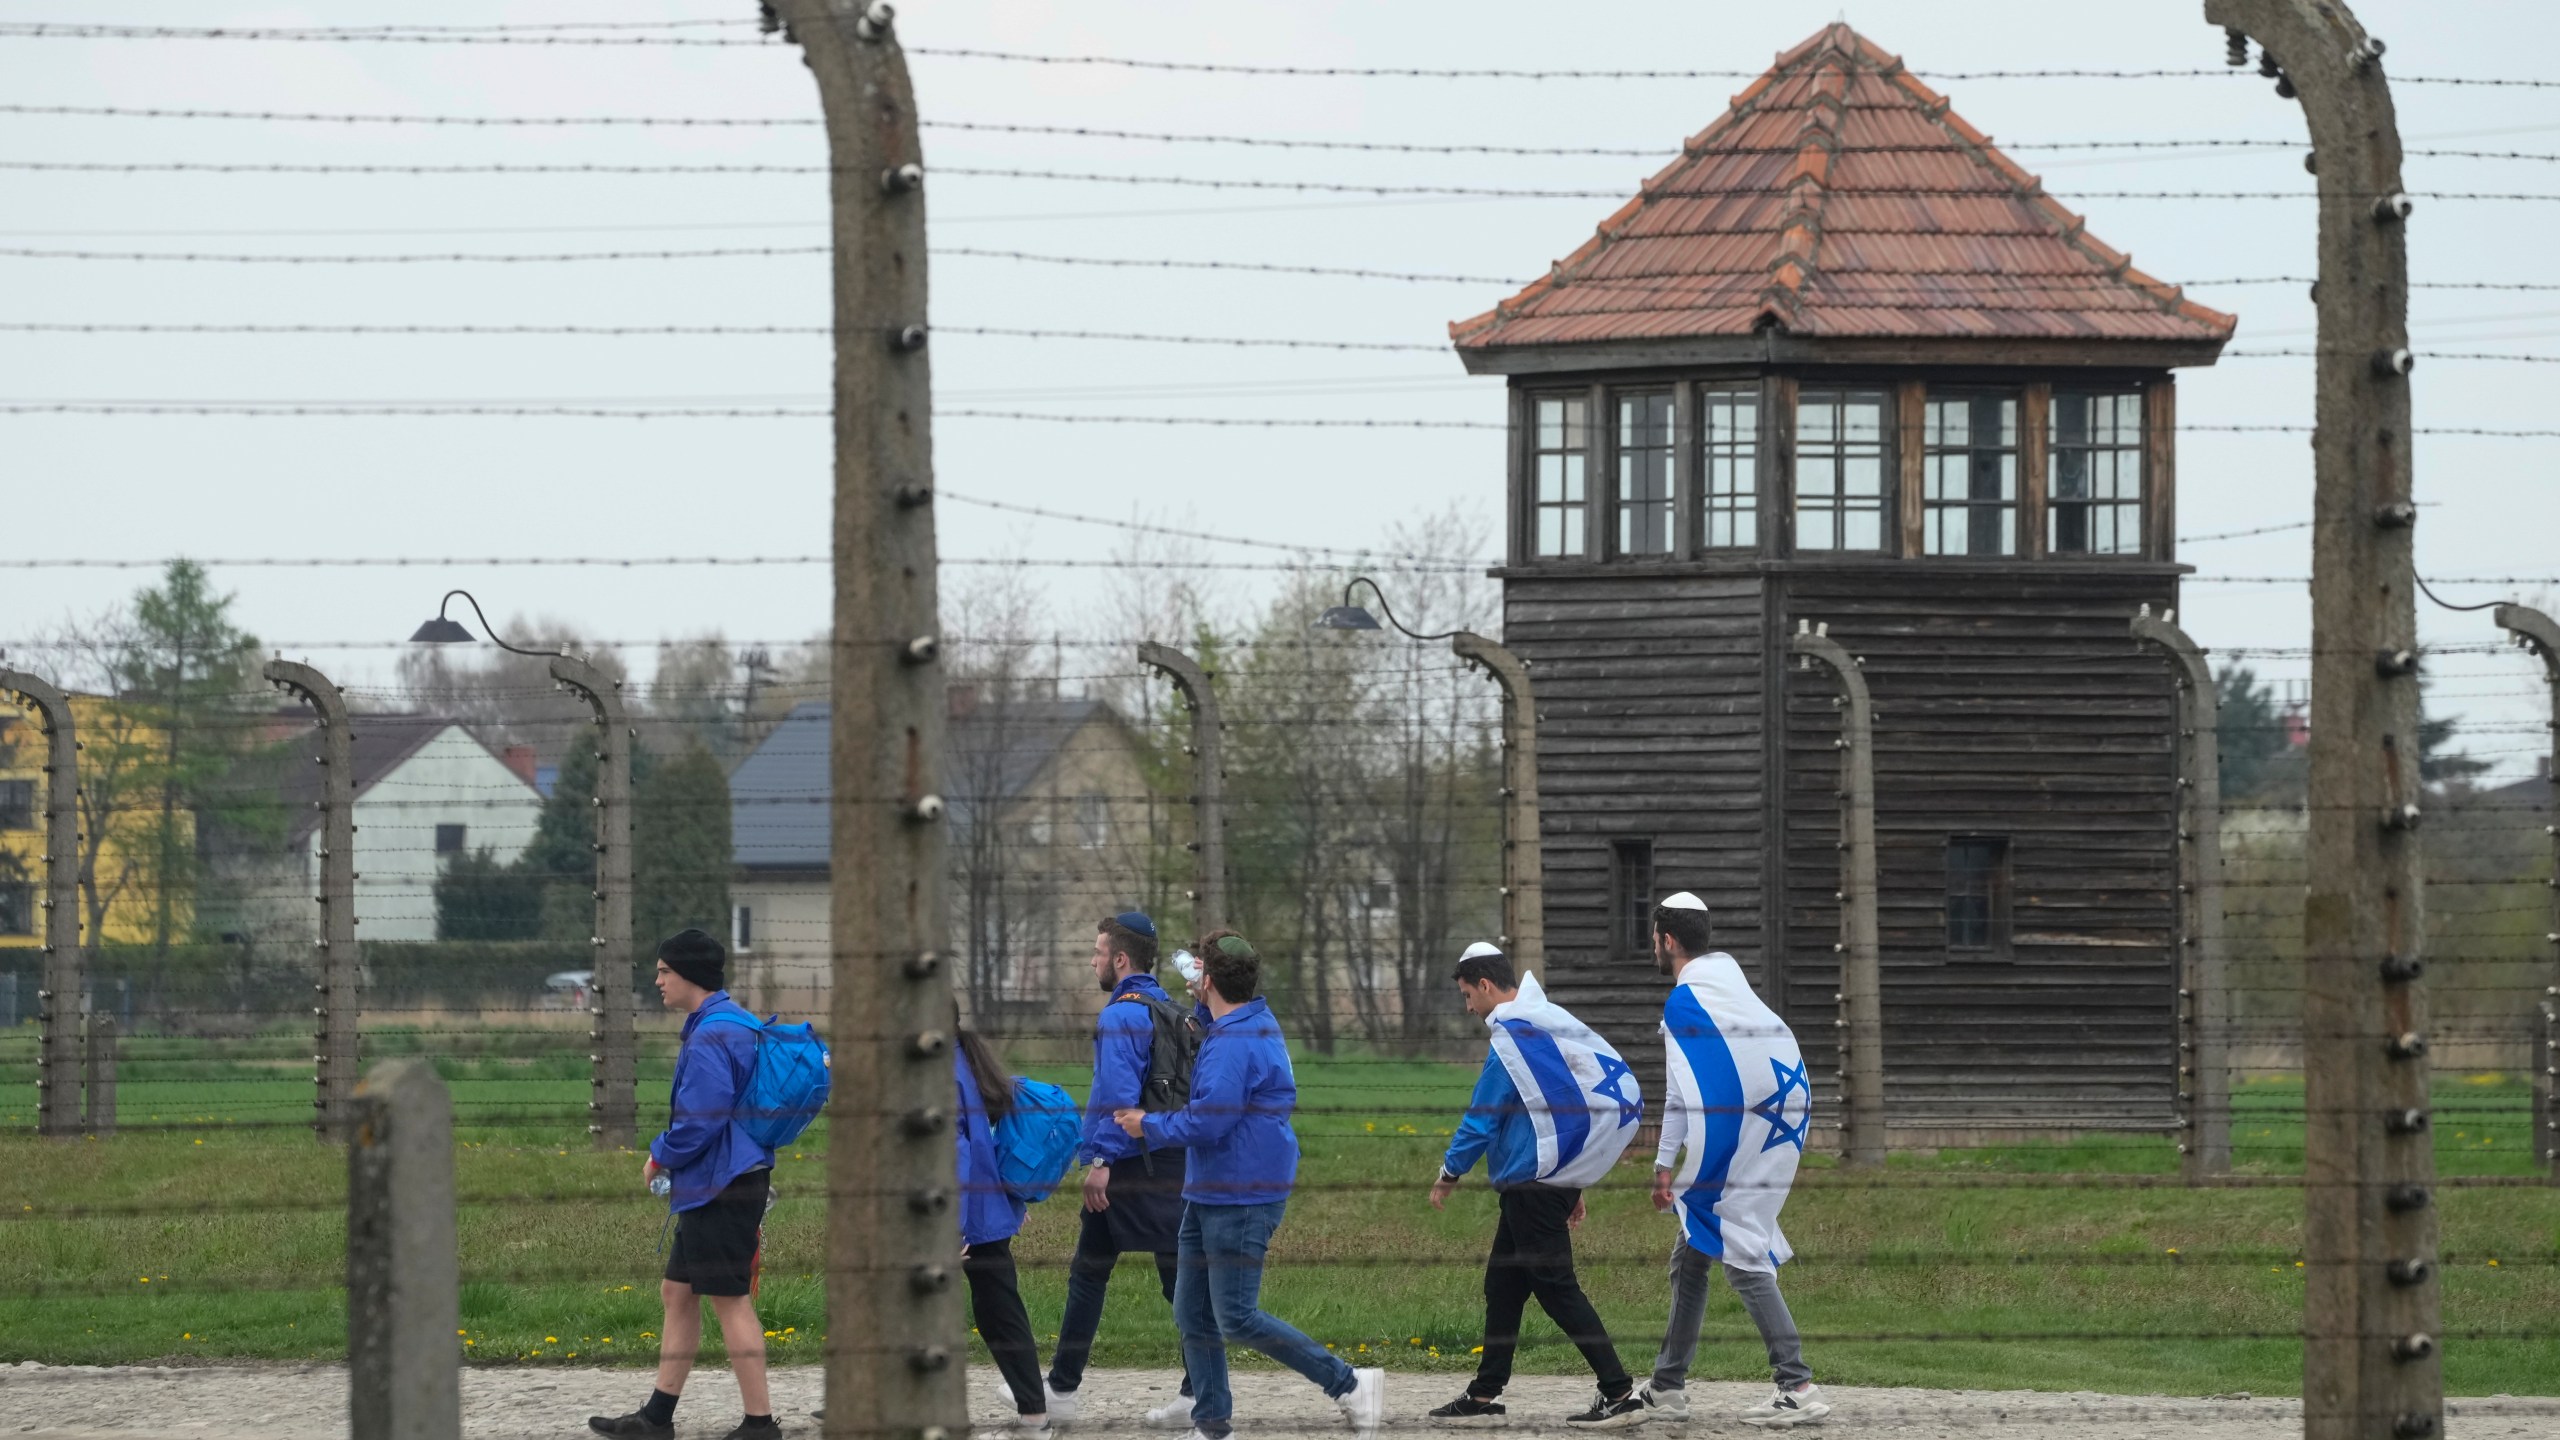 FILE - Jewish people visit the Auschwitz Nazi concentration camp after the March of the Living annual observance, in Oswiecim, Poland, April 28, 2022. Israel's national Holocaust memorial has criticized a new agreement renewing Israeli school trips to Poland, saying it recommends a number of "problematic sites" that distort history. (AP Photo/Czarek Sokolowski, File)